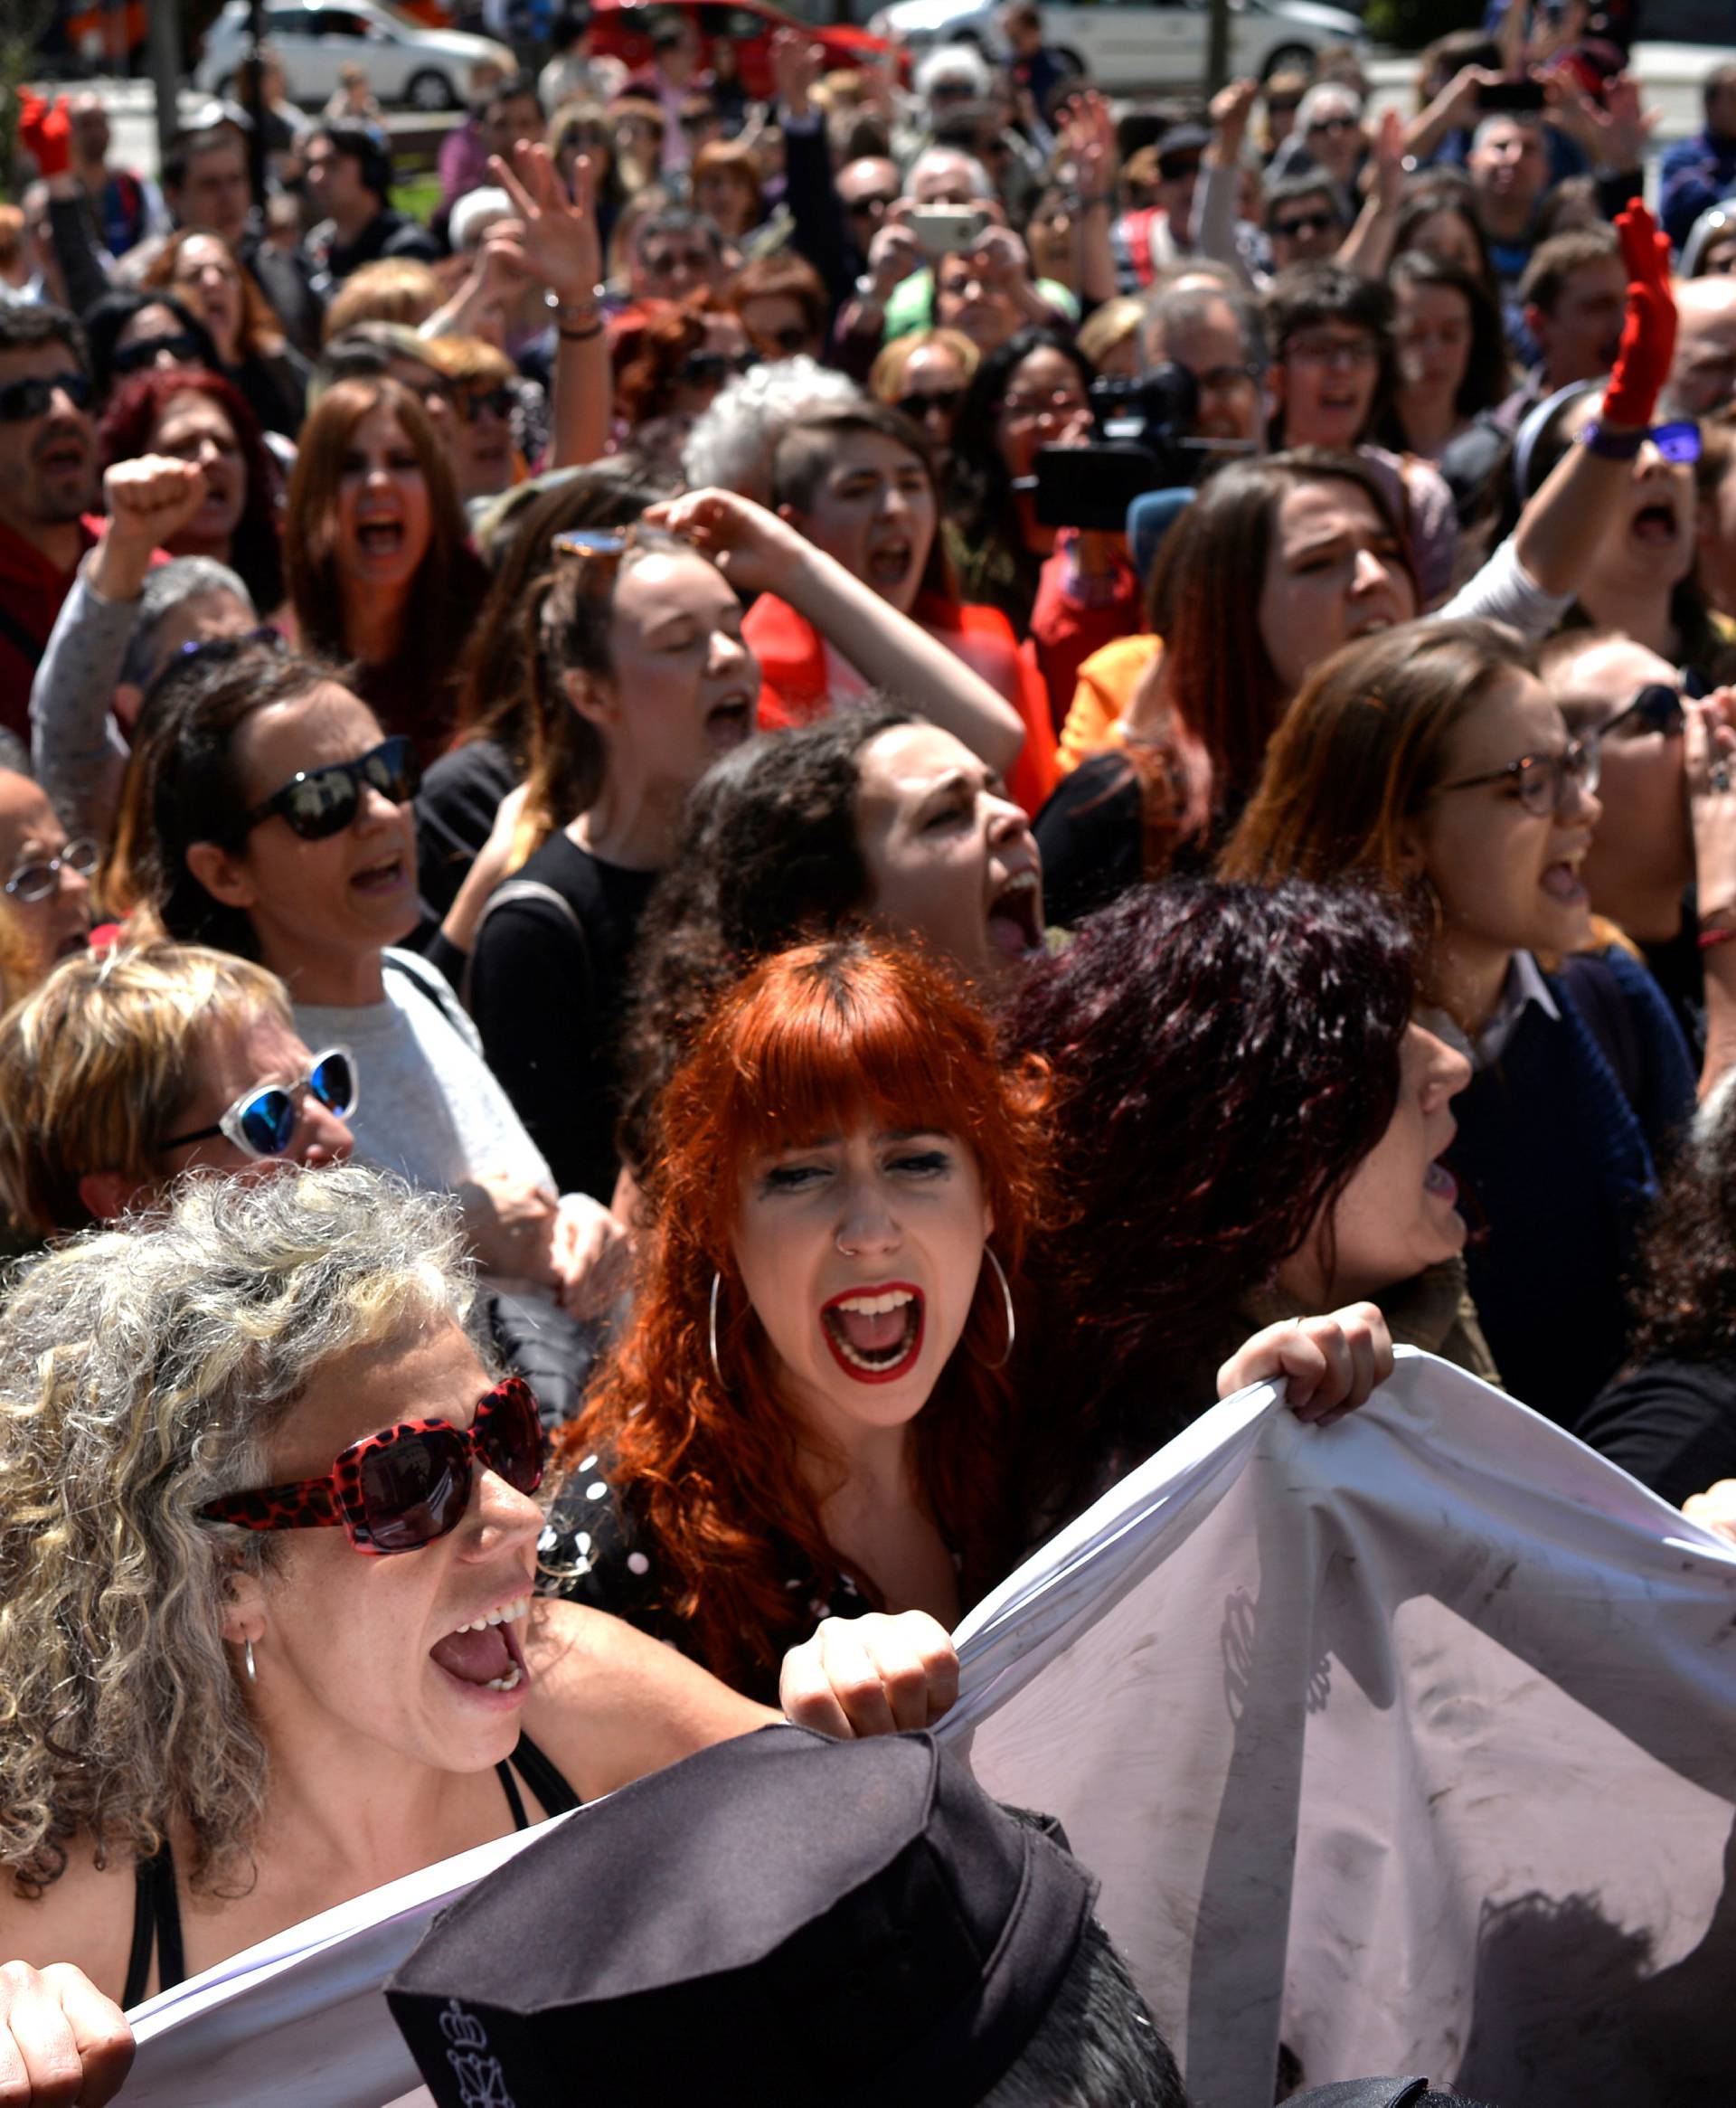 Protesters chant "It's not abuse, it's rape!" after a nine-year prison sentence was given to five men accused of the multiple rape of a woman during Pamplona's San Fermin festival in 2016, in Pamplona